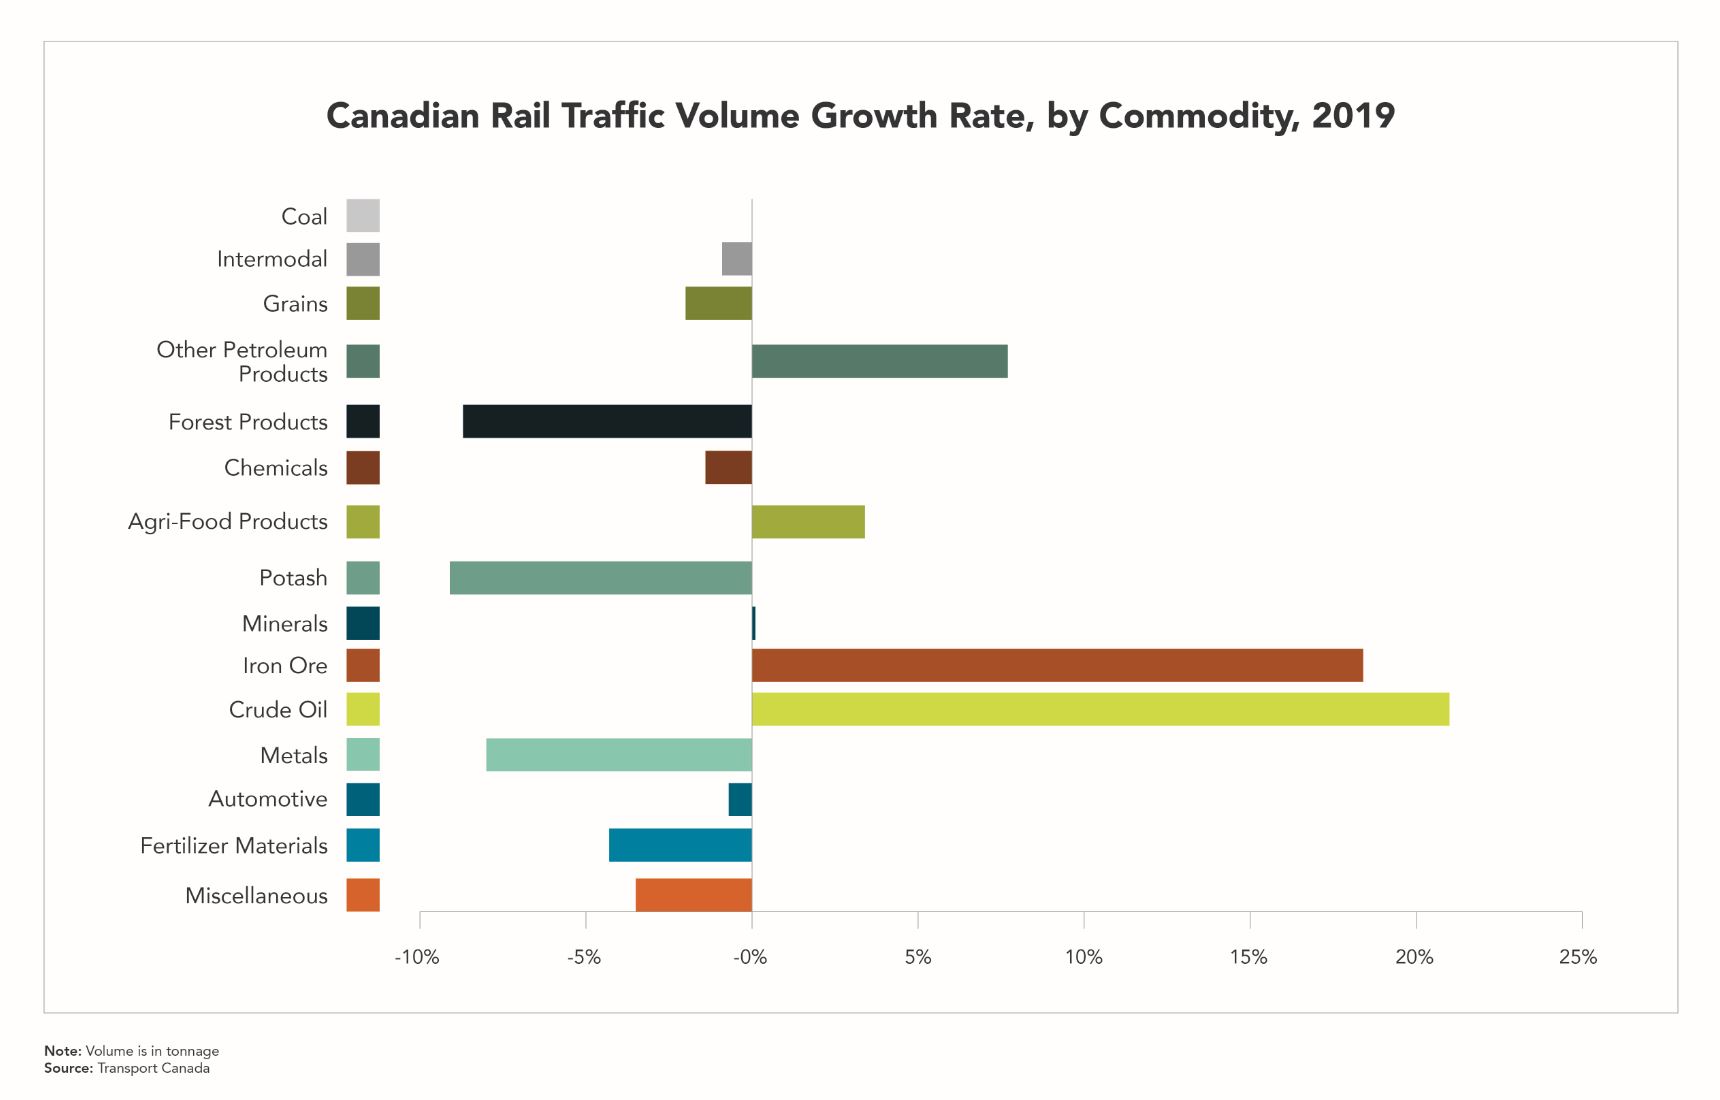 Canadian Rail Traffic Volume Growth Rate, by Commodity, 2019